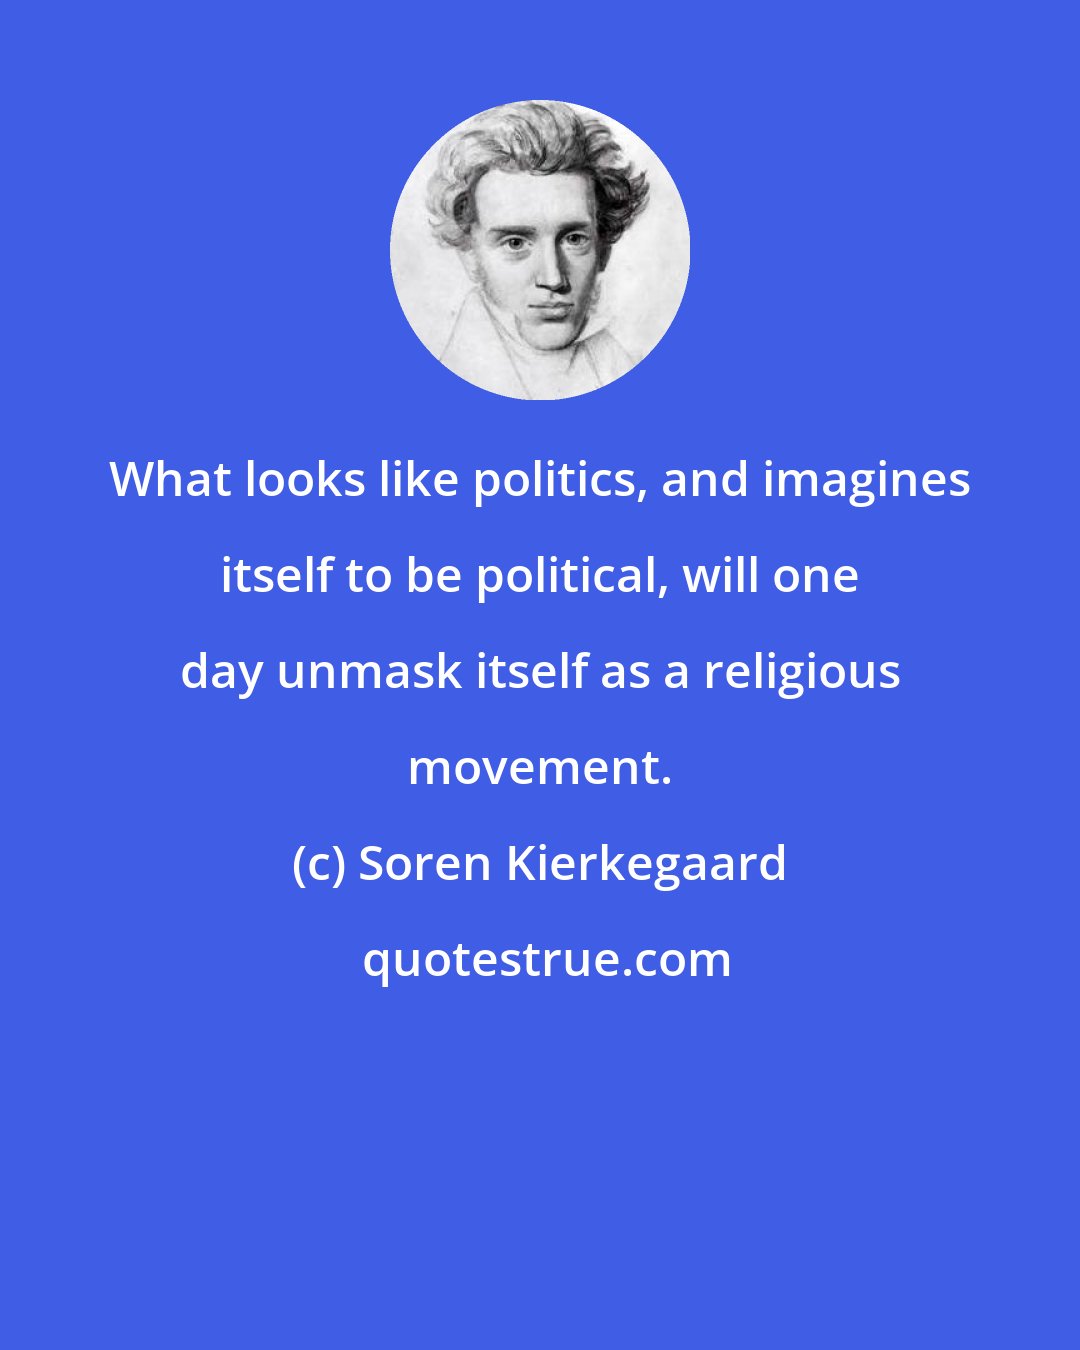 Soren Kierkegaard: What looks like politics, and imagines itself to be political, will one day unmask itself as a religious movement.